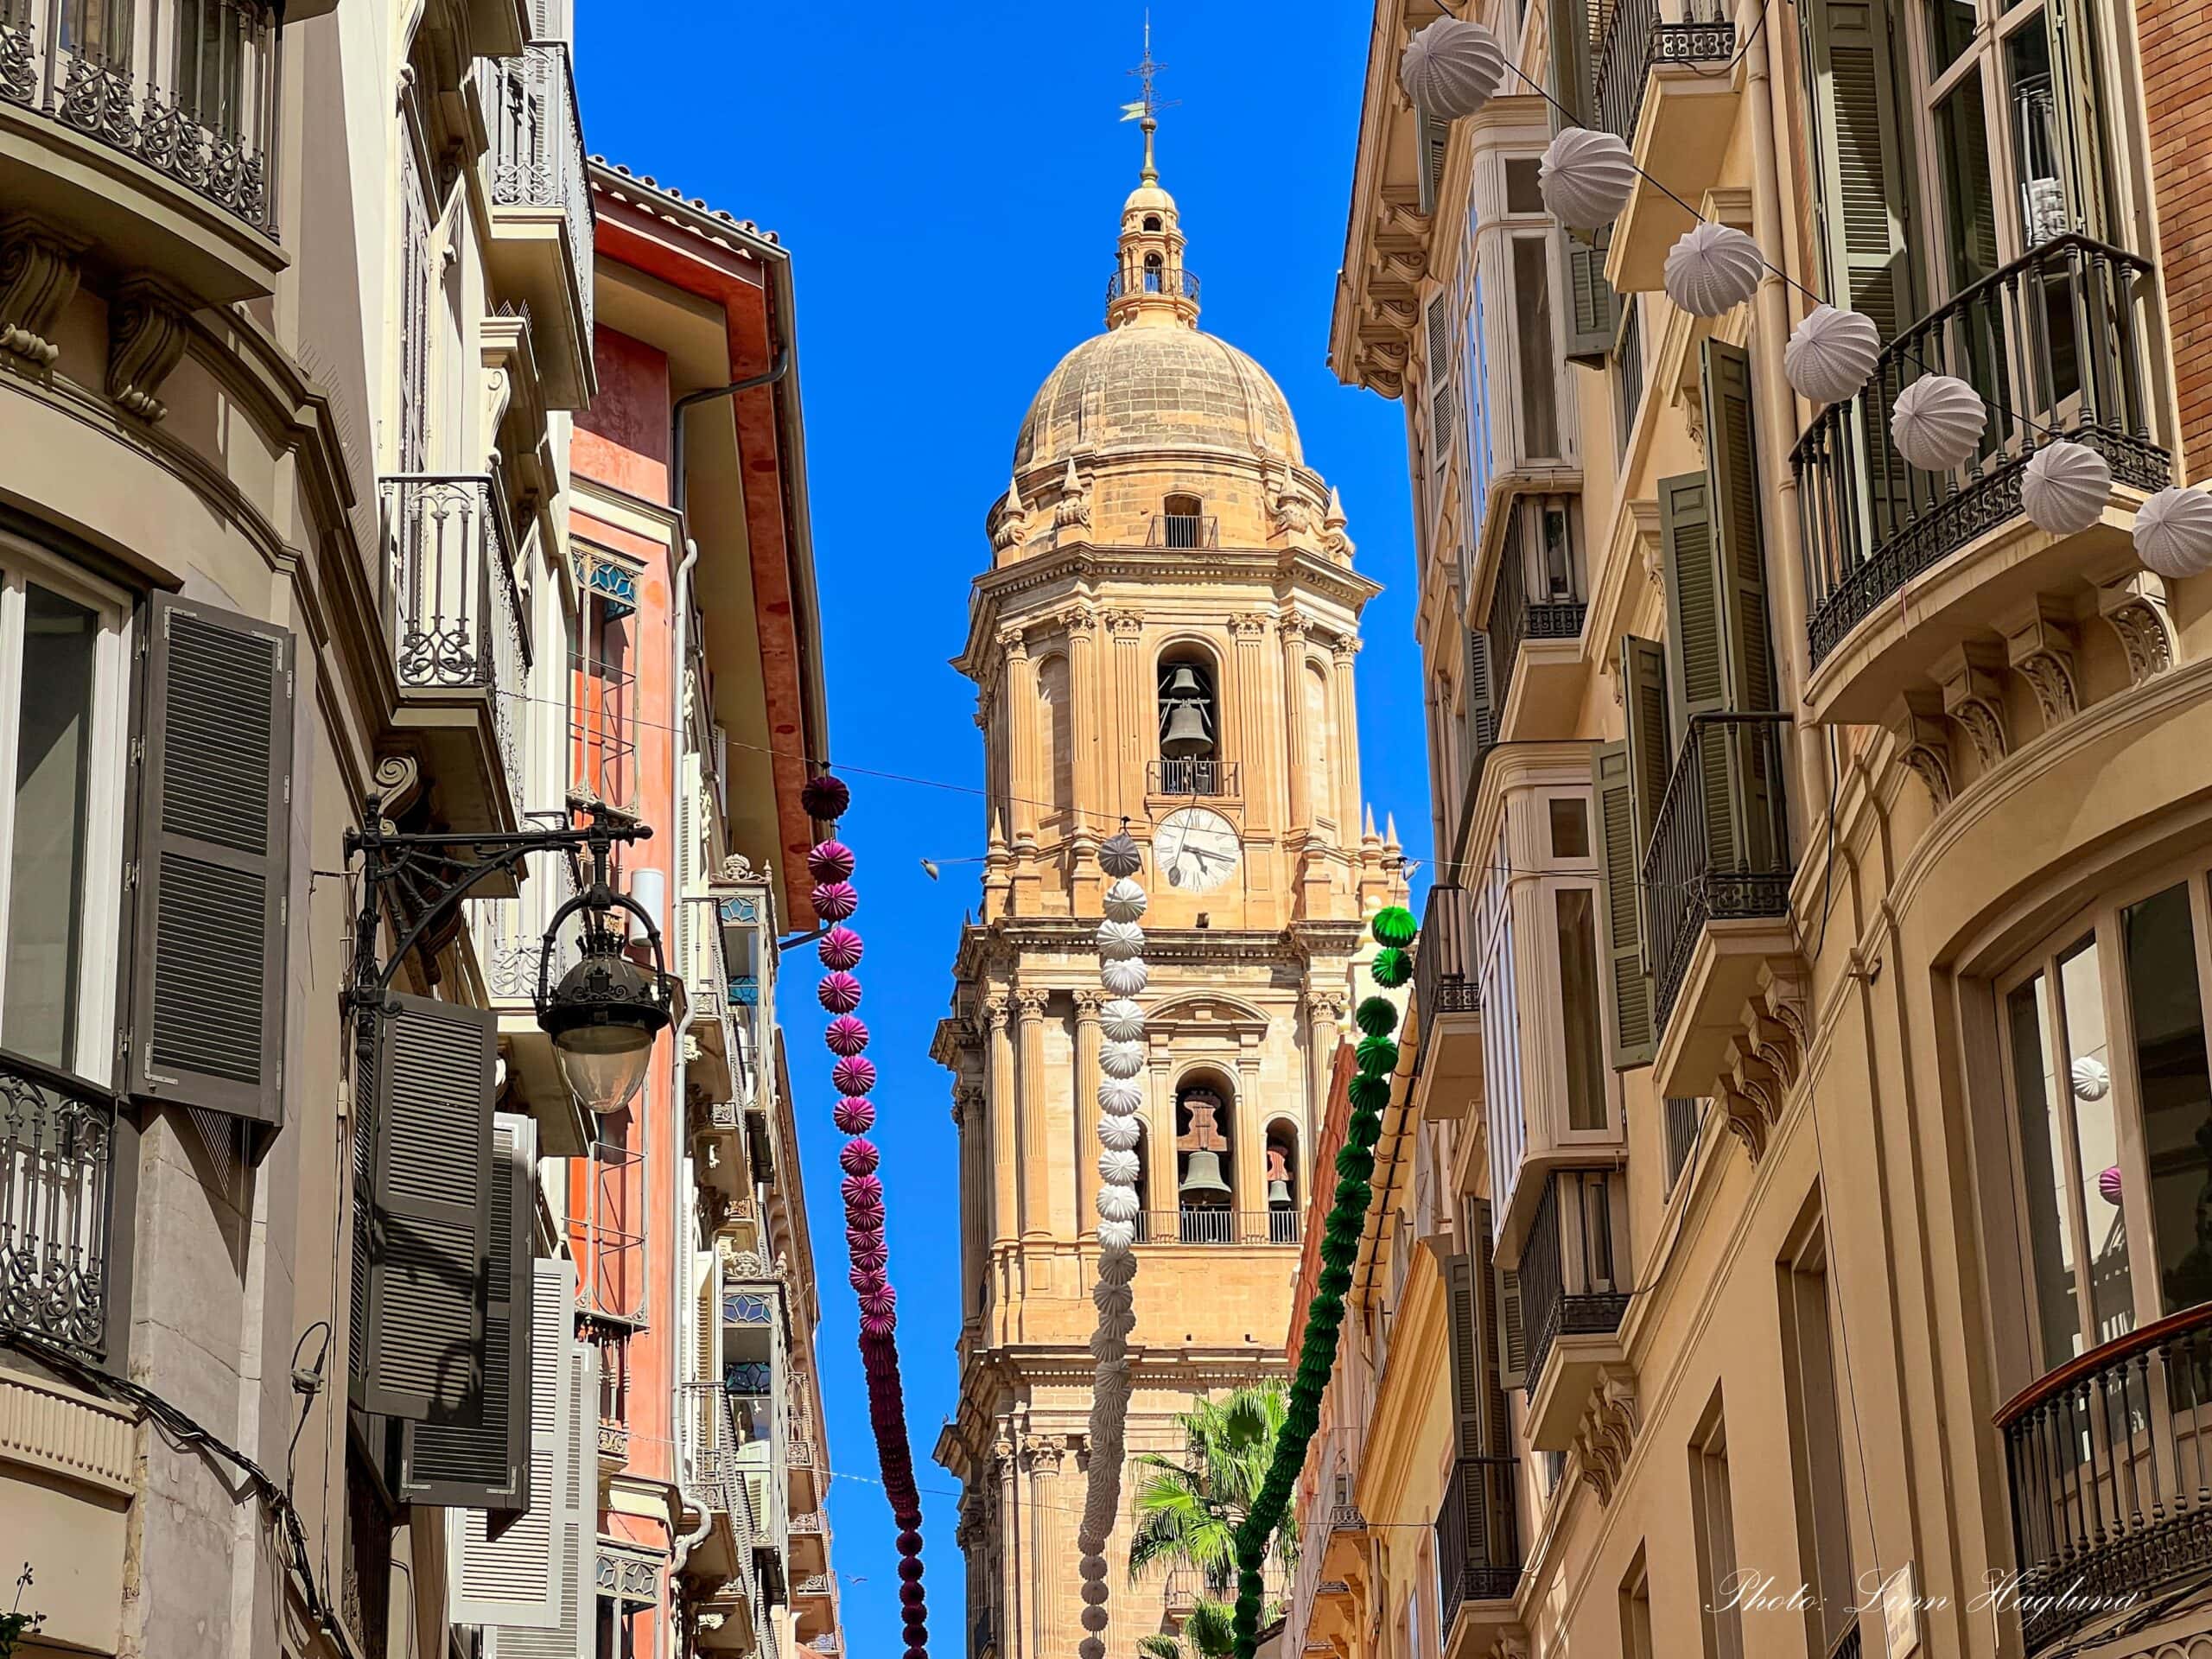 View of the one tower of Malaga Cathedral from a narrow alley with ornate building on either side, with a clear blue sky above.